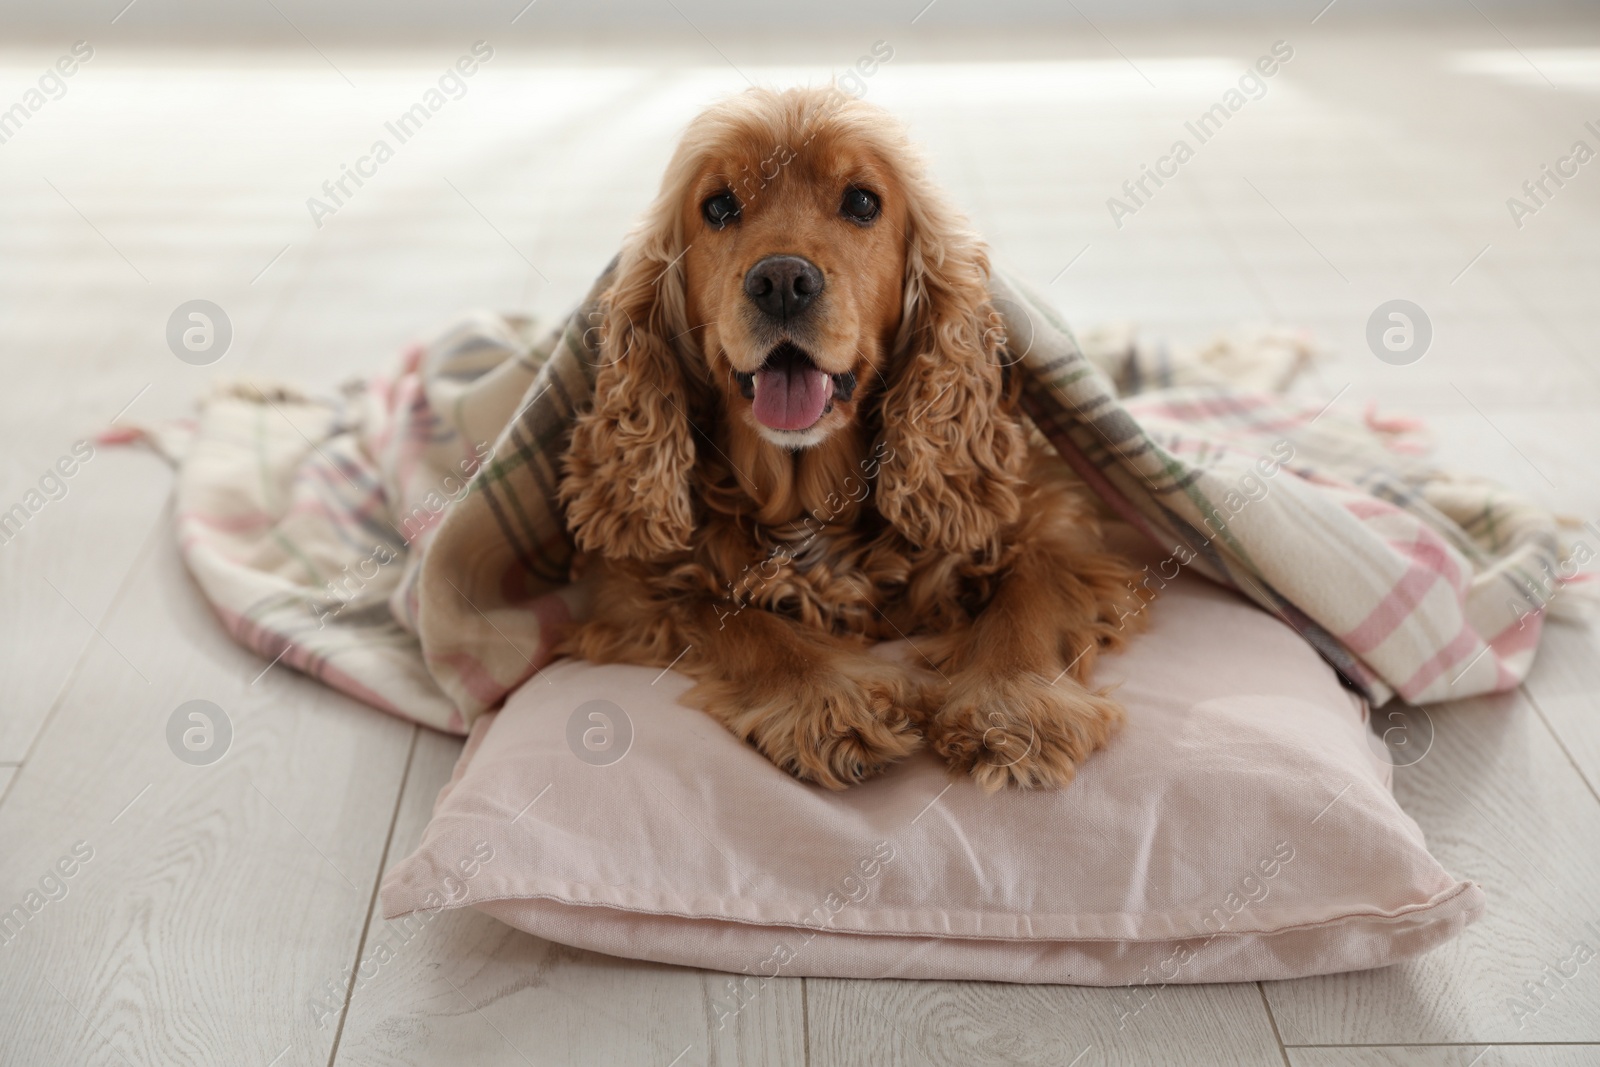 Photo of Cute English cocker spaniel dog with plaid and pillow on floor